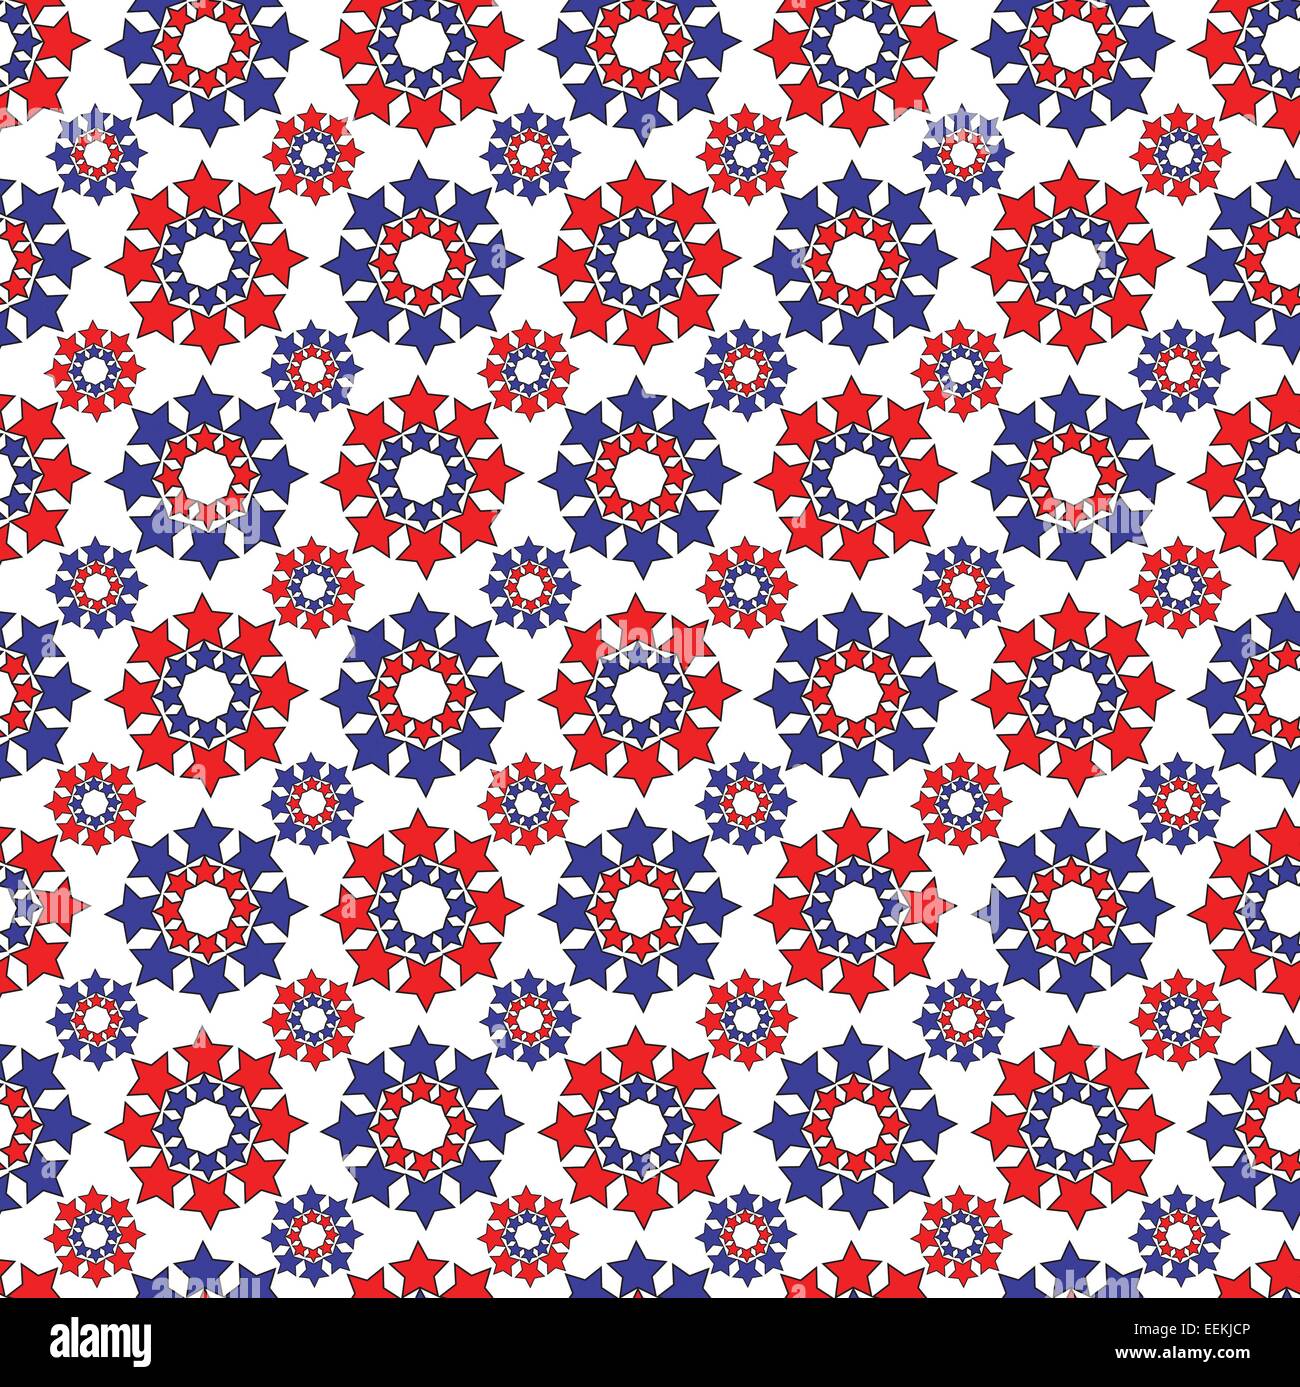 Red and blue stars in big and small circles, a seamless background pattern Stock Photo